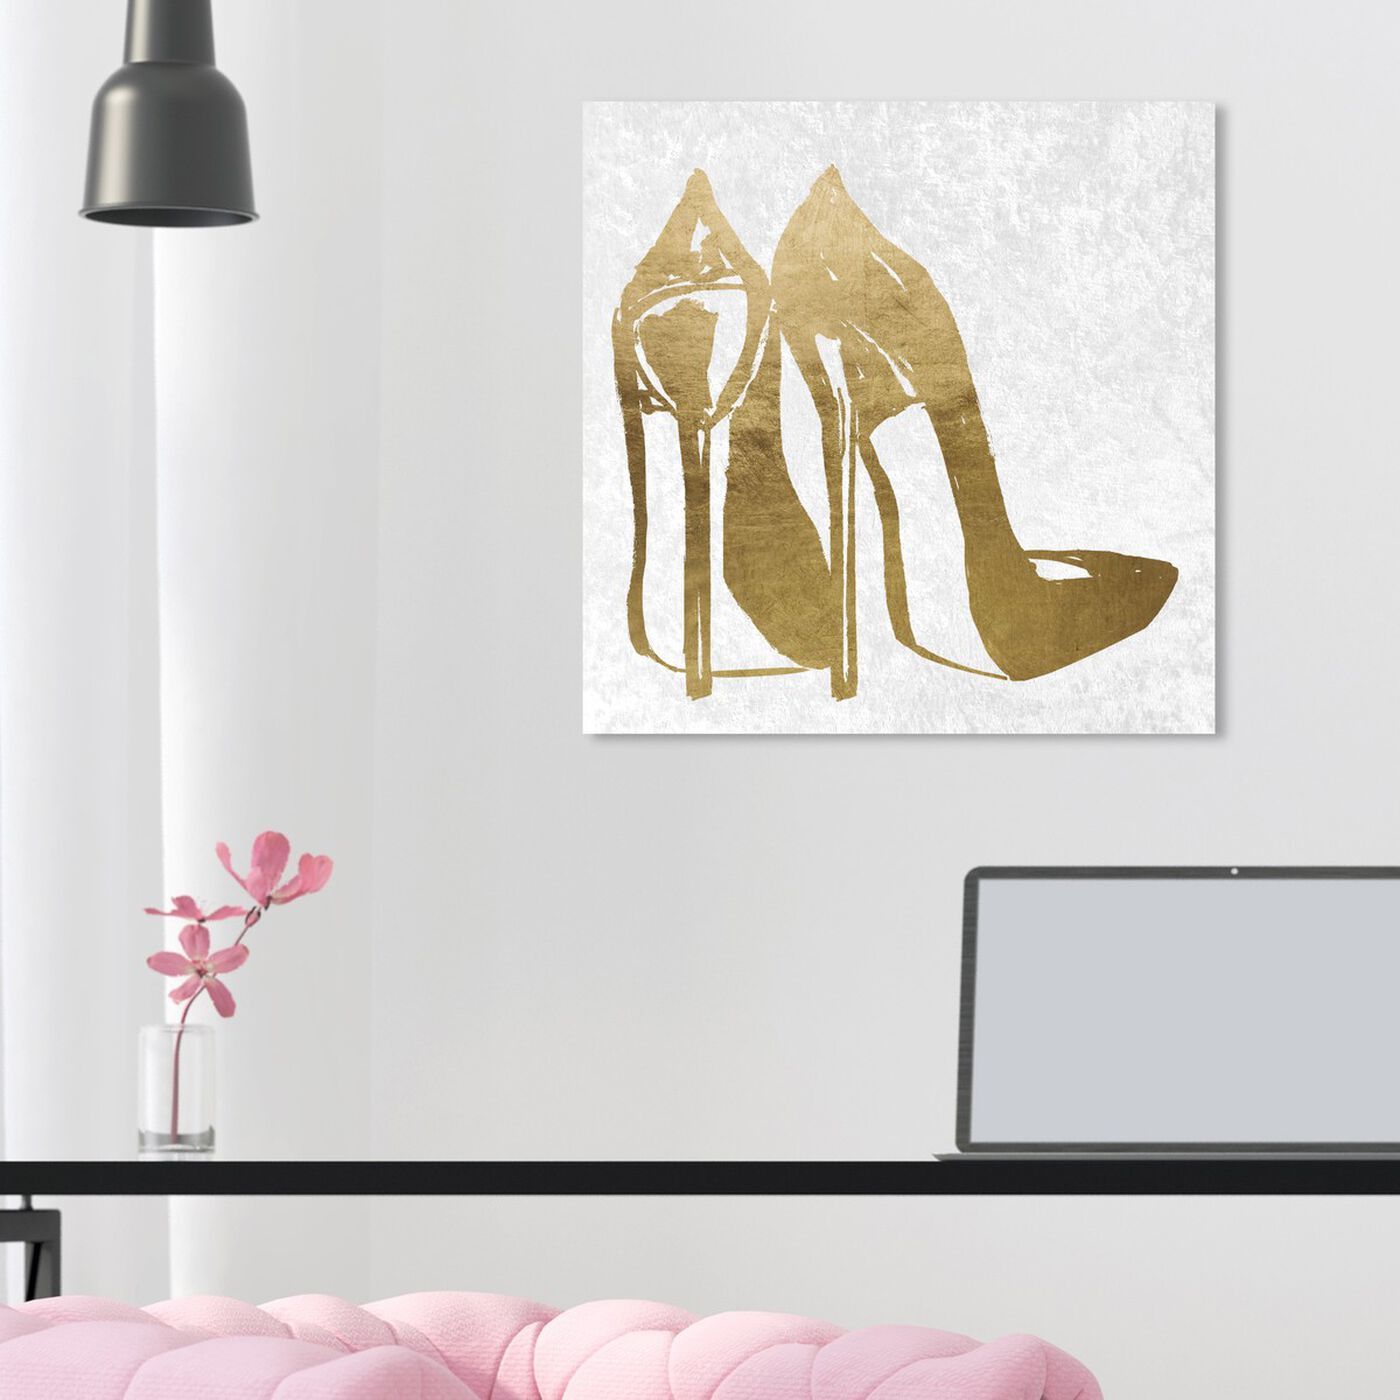 Hanging view of Gold and Velvet Heels featuring fashion and glam and shoes art.